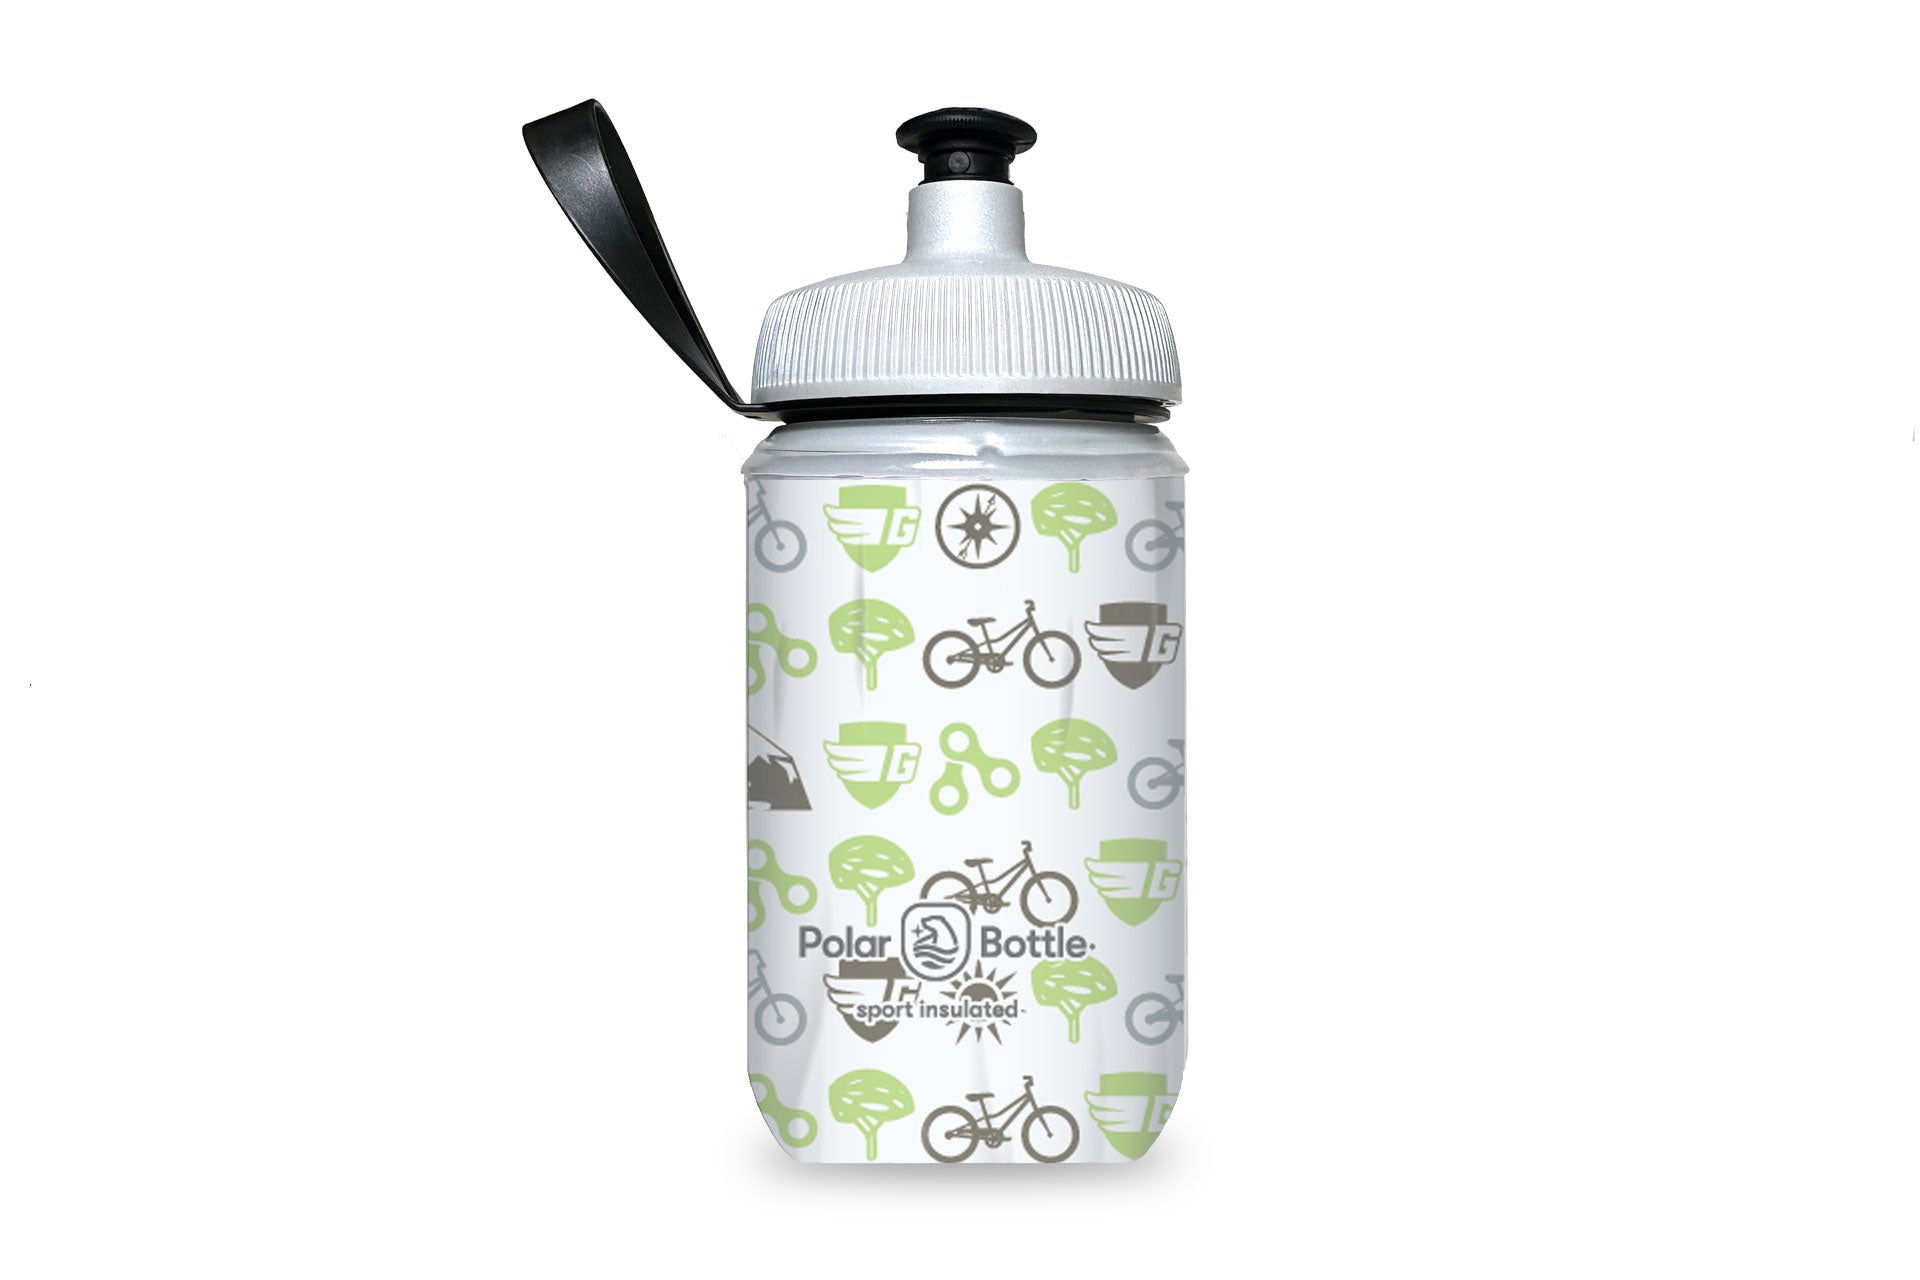 Just Her Style 12 oz Insulated Water Bottle